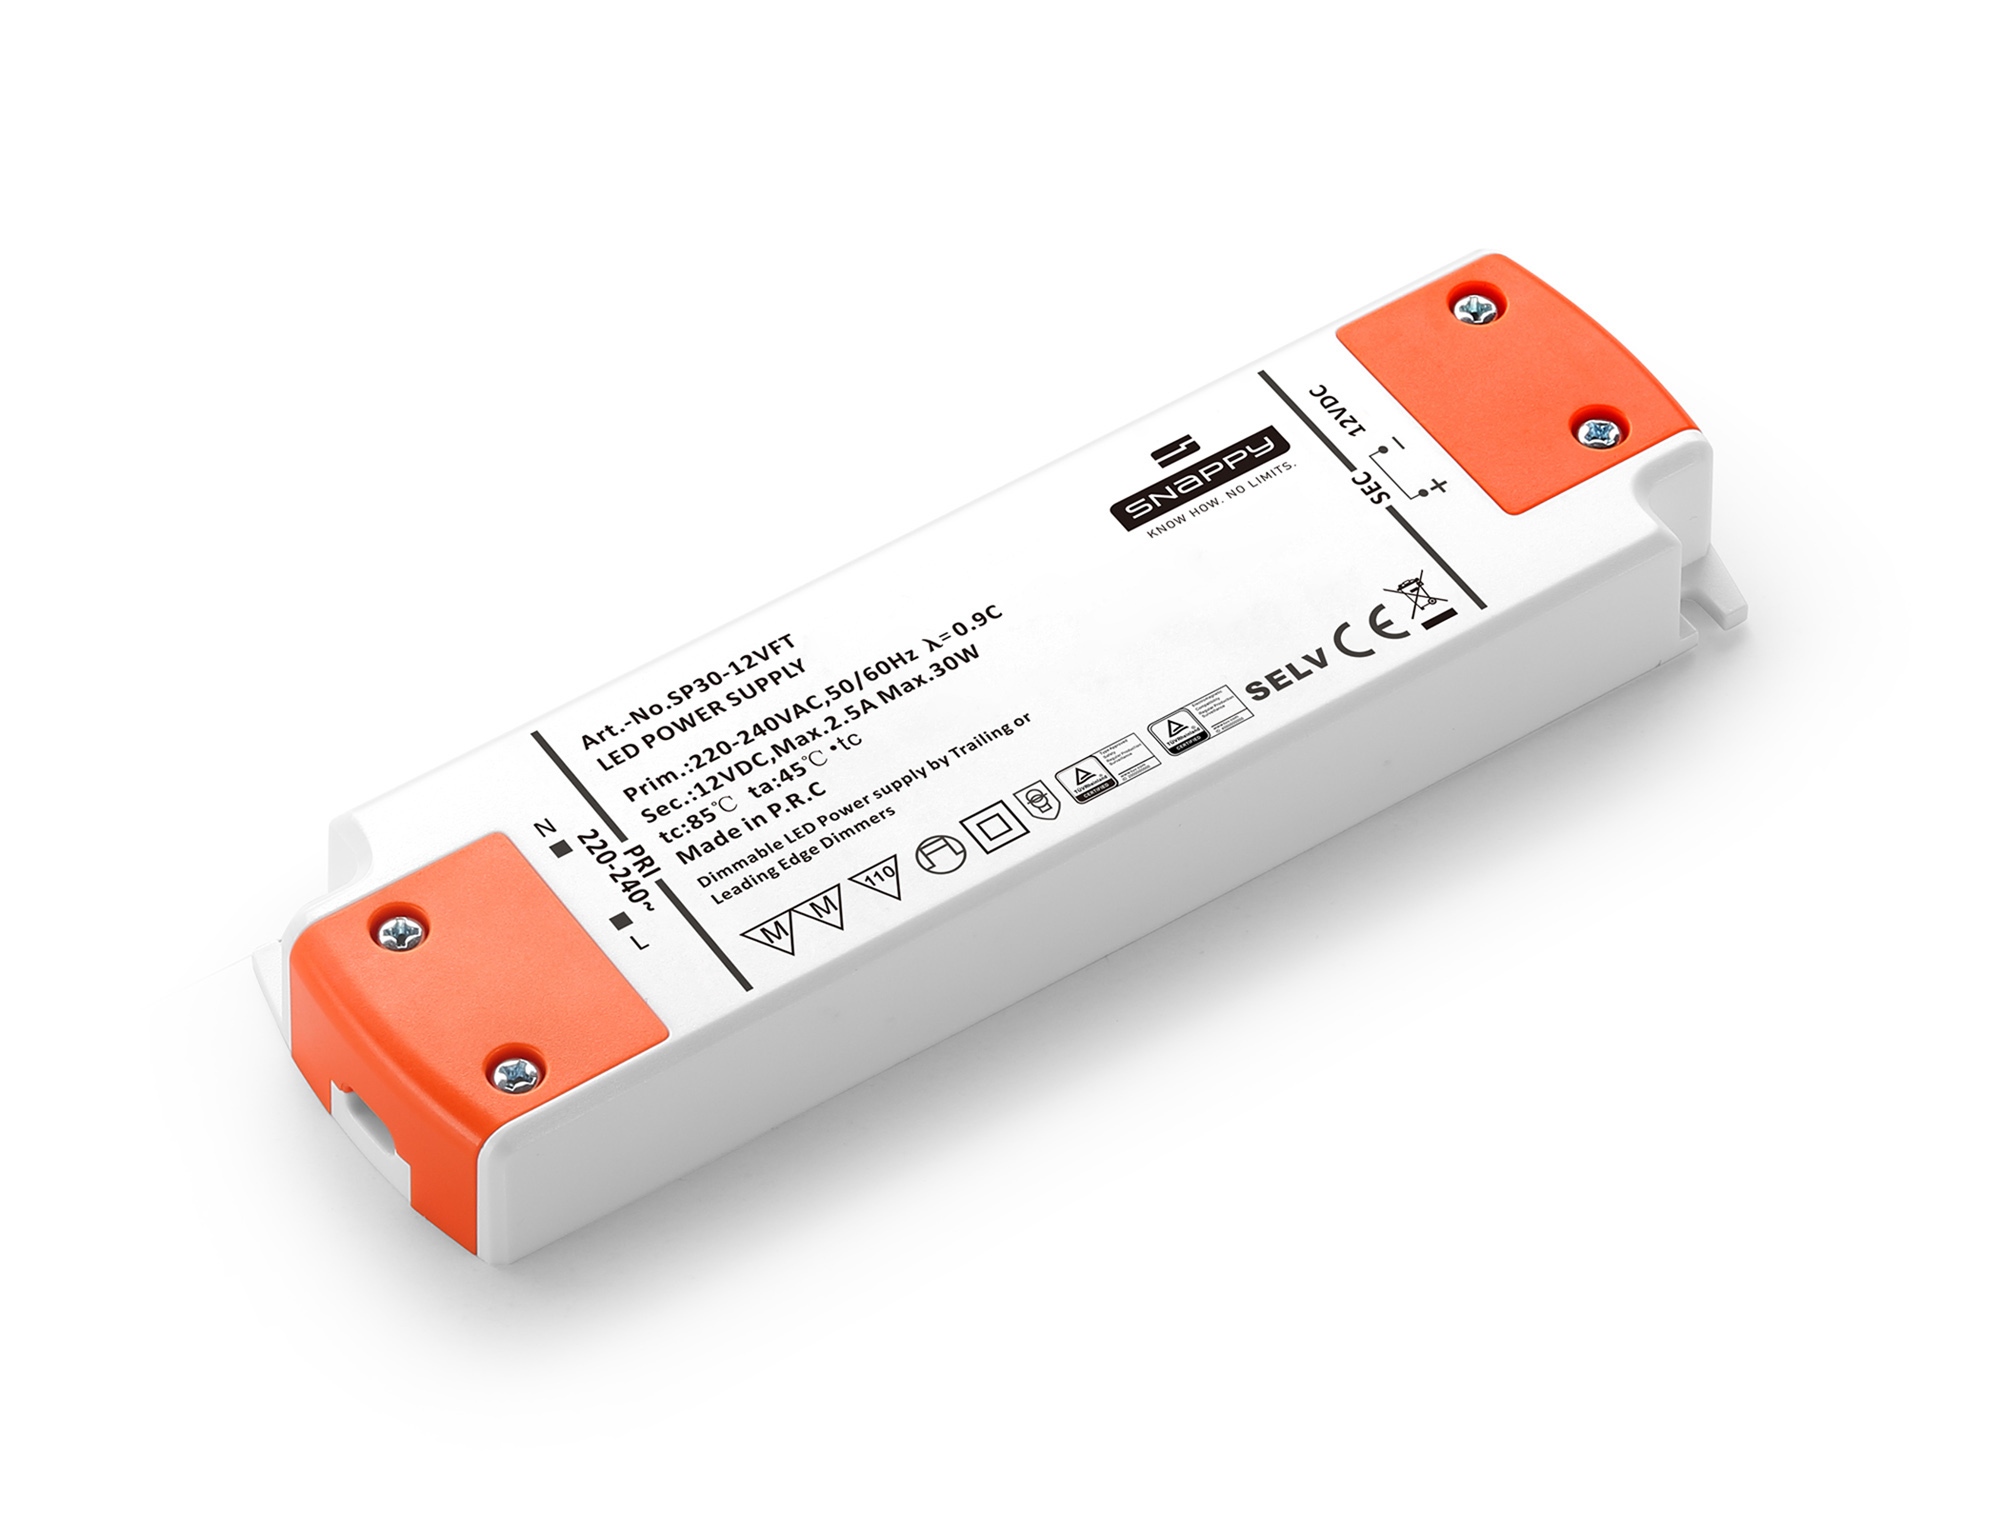 SP30-12VFT  SP; 30W; Constant Voltage Triac Dimmable PC LED Driver; 12VDC; 2.5A; Pf>0.9; TC:+85?; TA:45?; IP20; Efficiency >80%; Screw Connection; 3yrs Warranty.